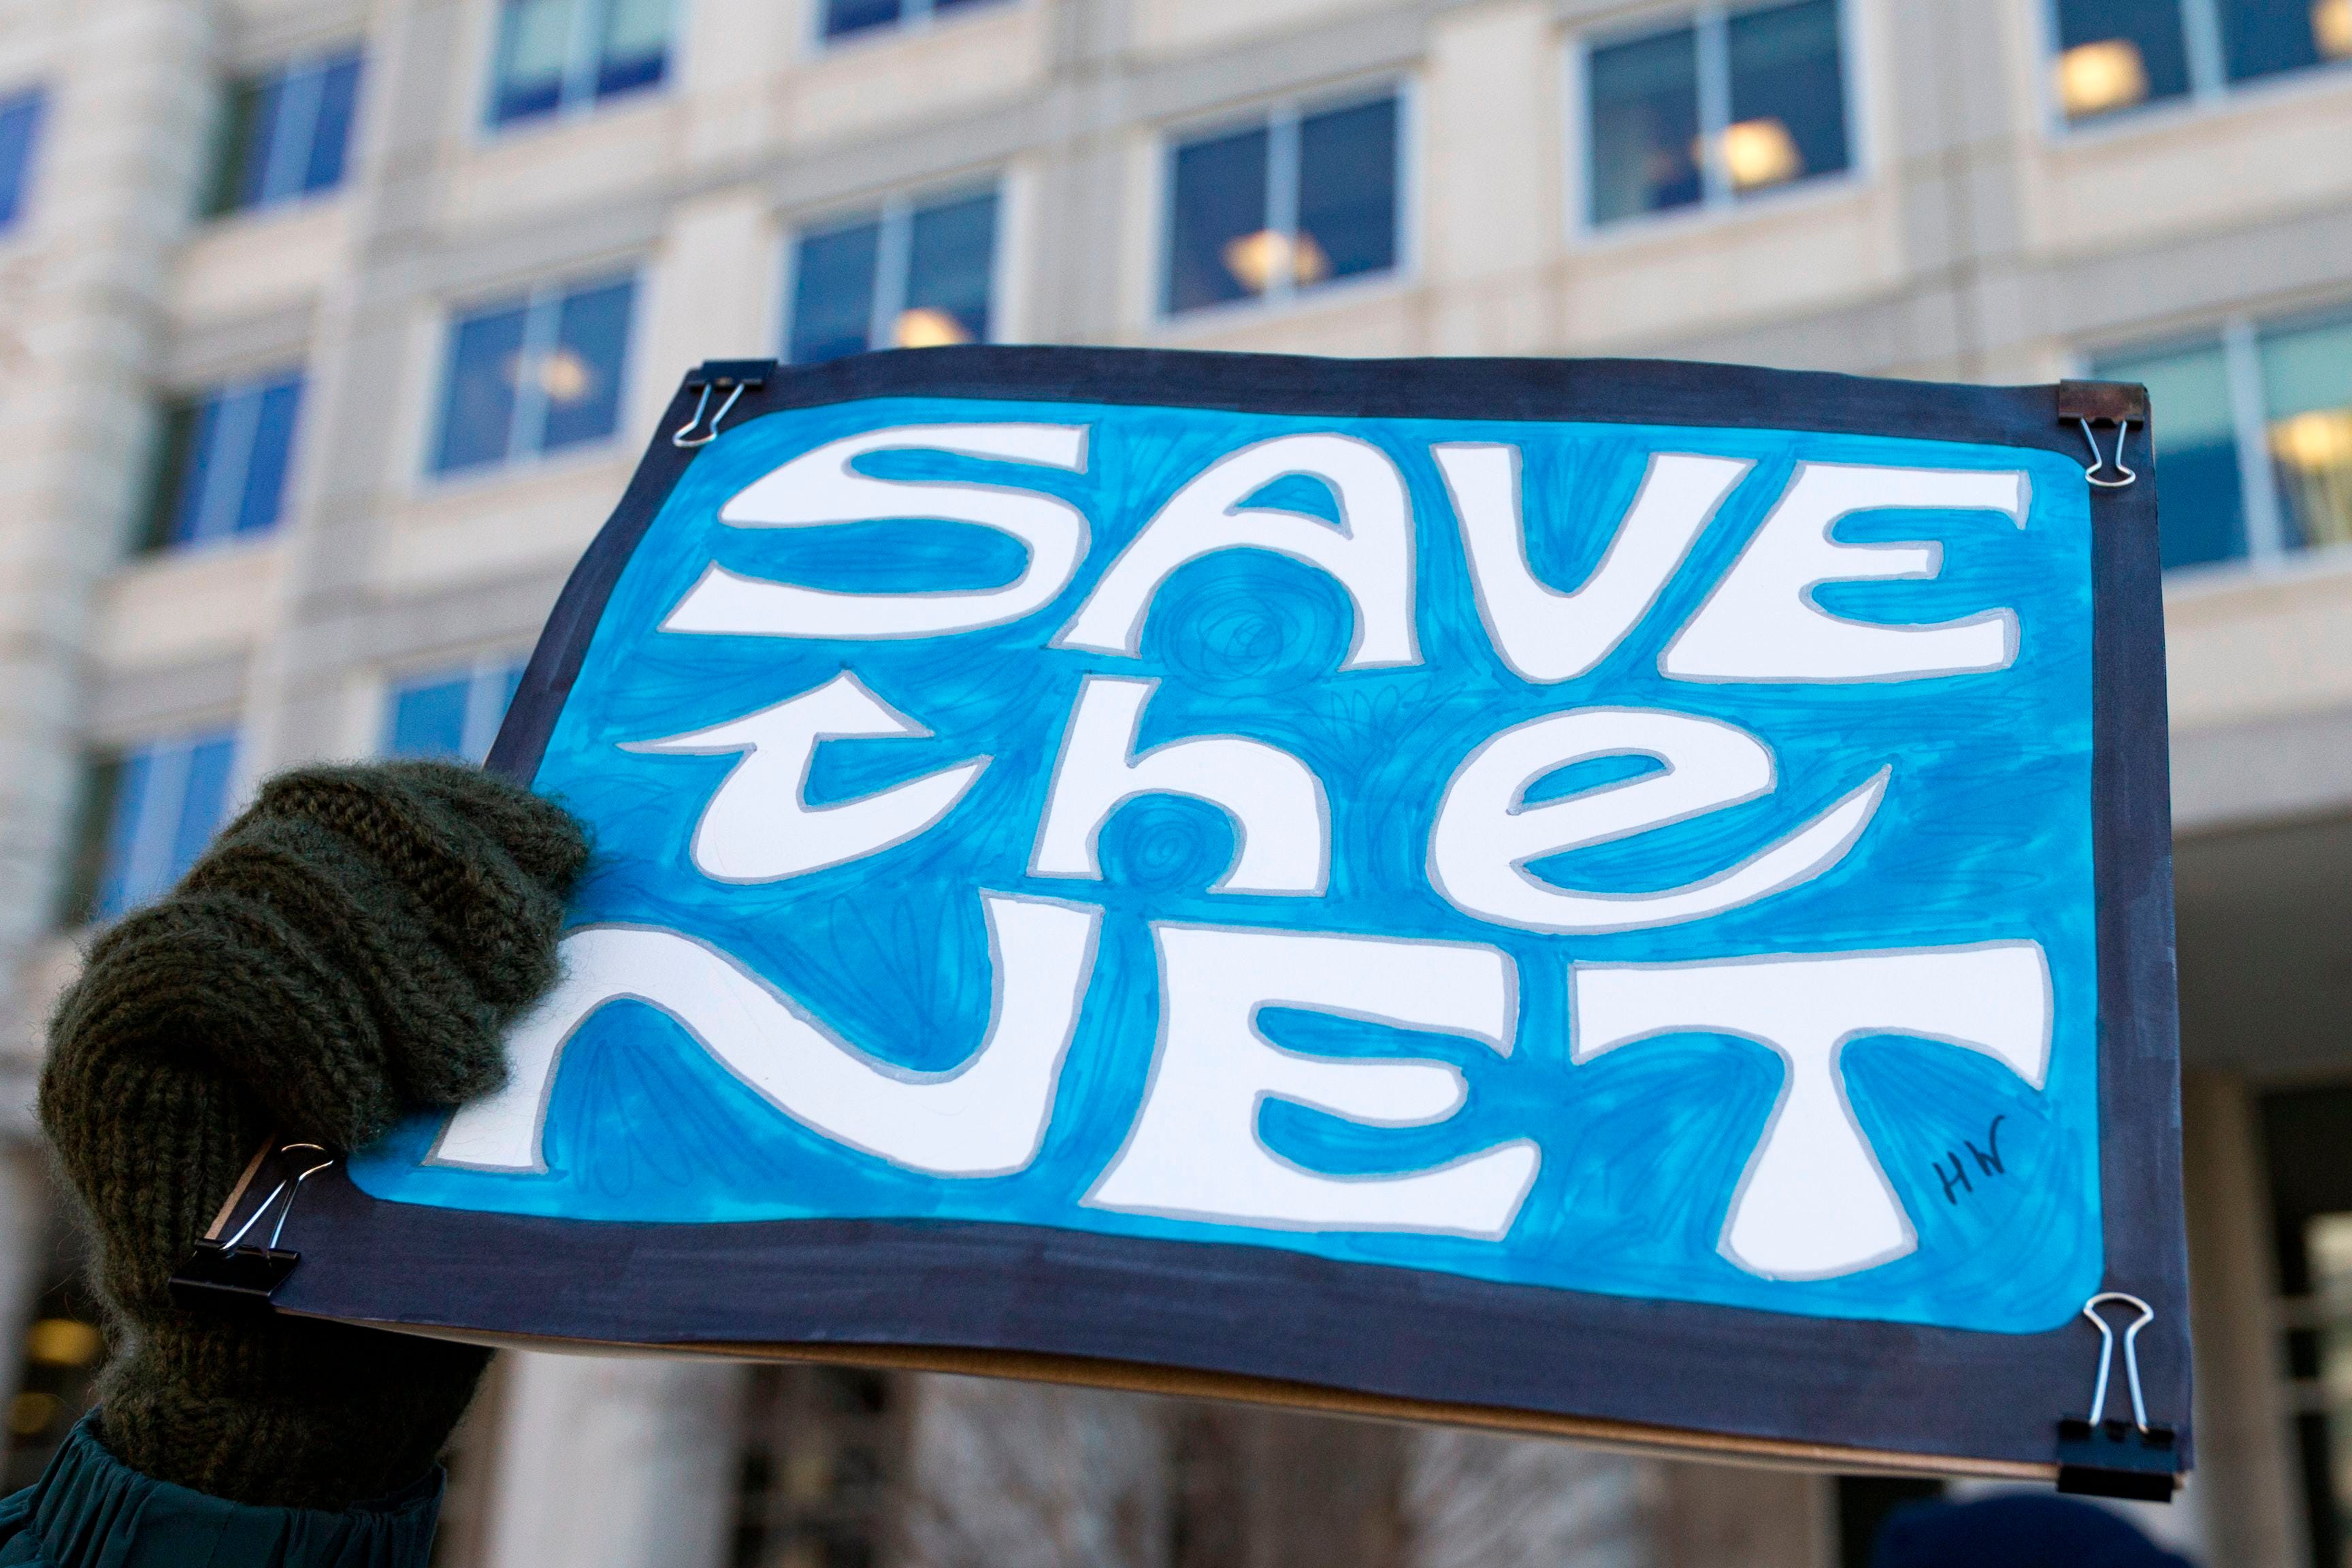 FCC overturns net neutrality rules, but supporters pledge to continue fight